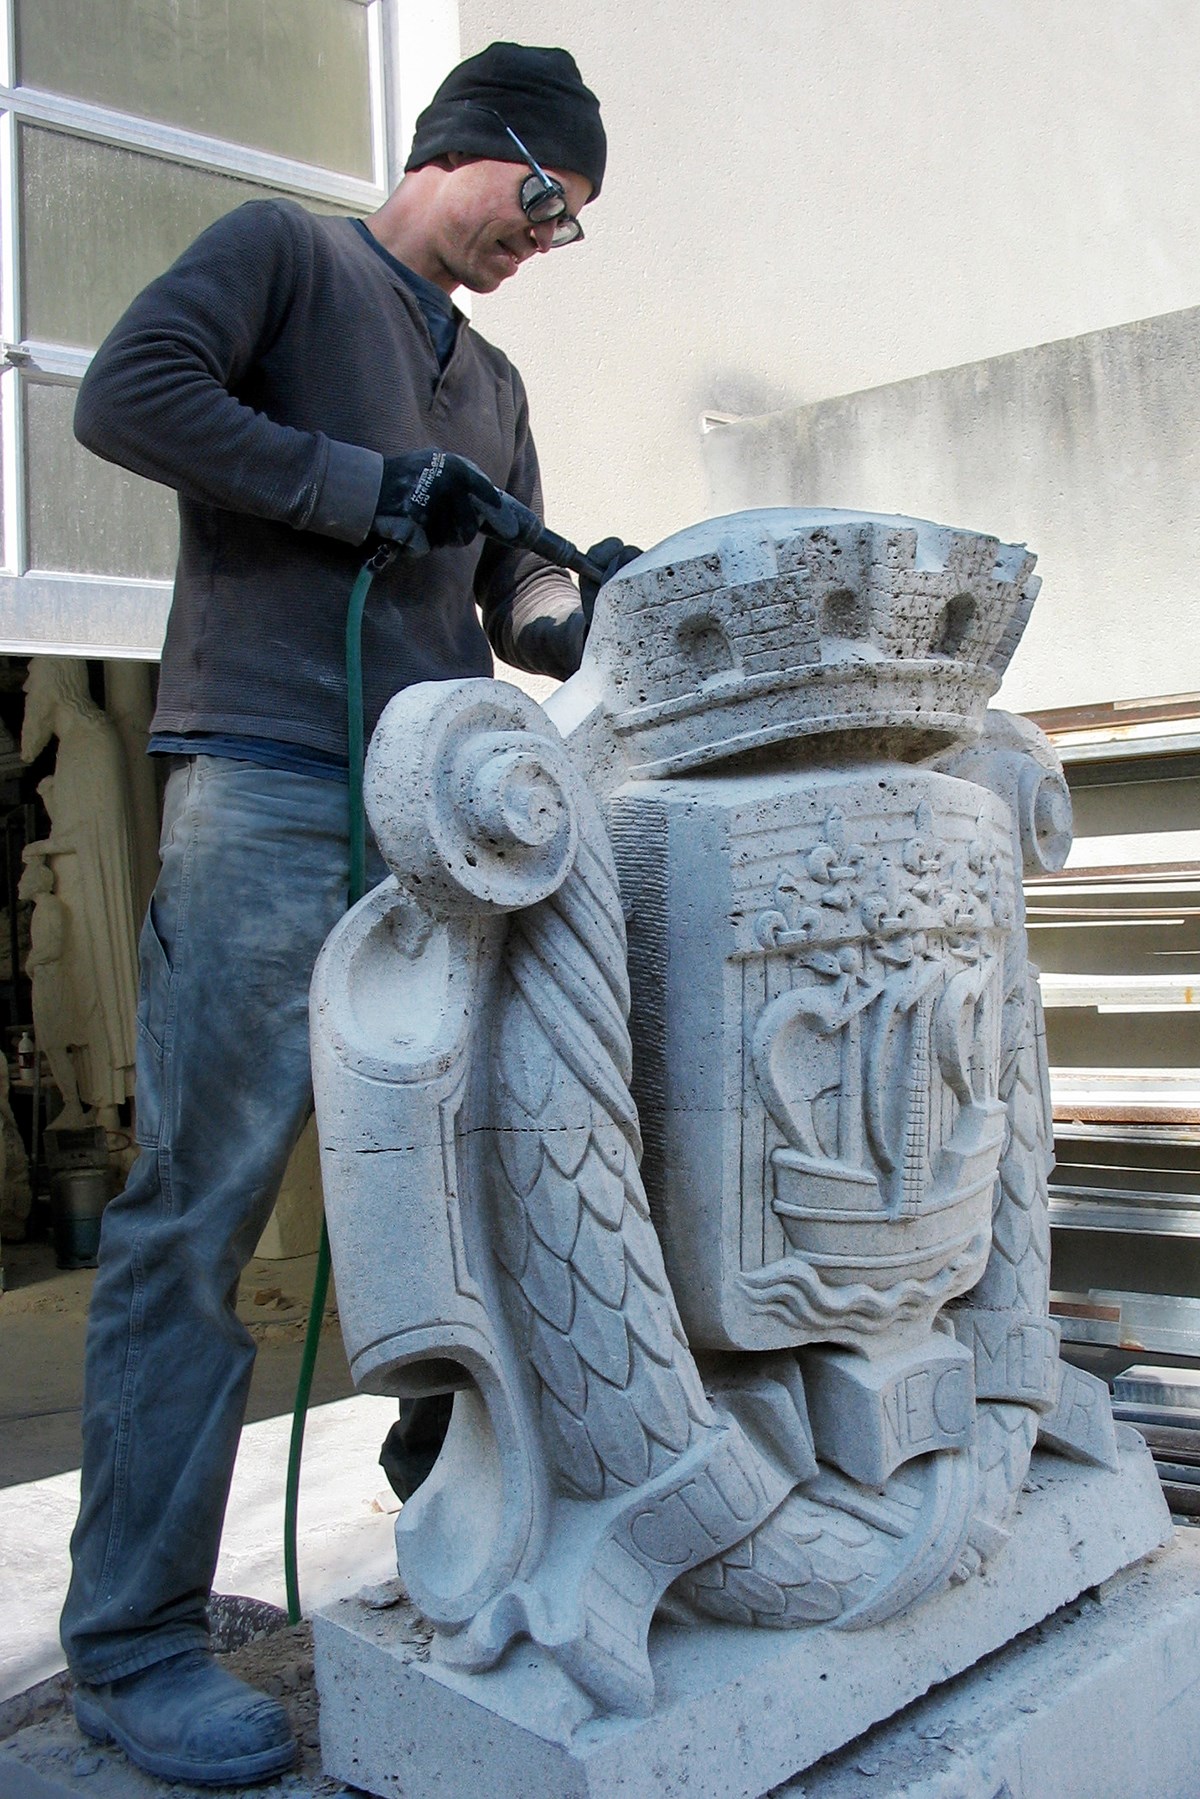 Mr. Smith works on a coat of arms for La Préfecture de Paris in 2011. (Photo credit: John-Philippe Smith)